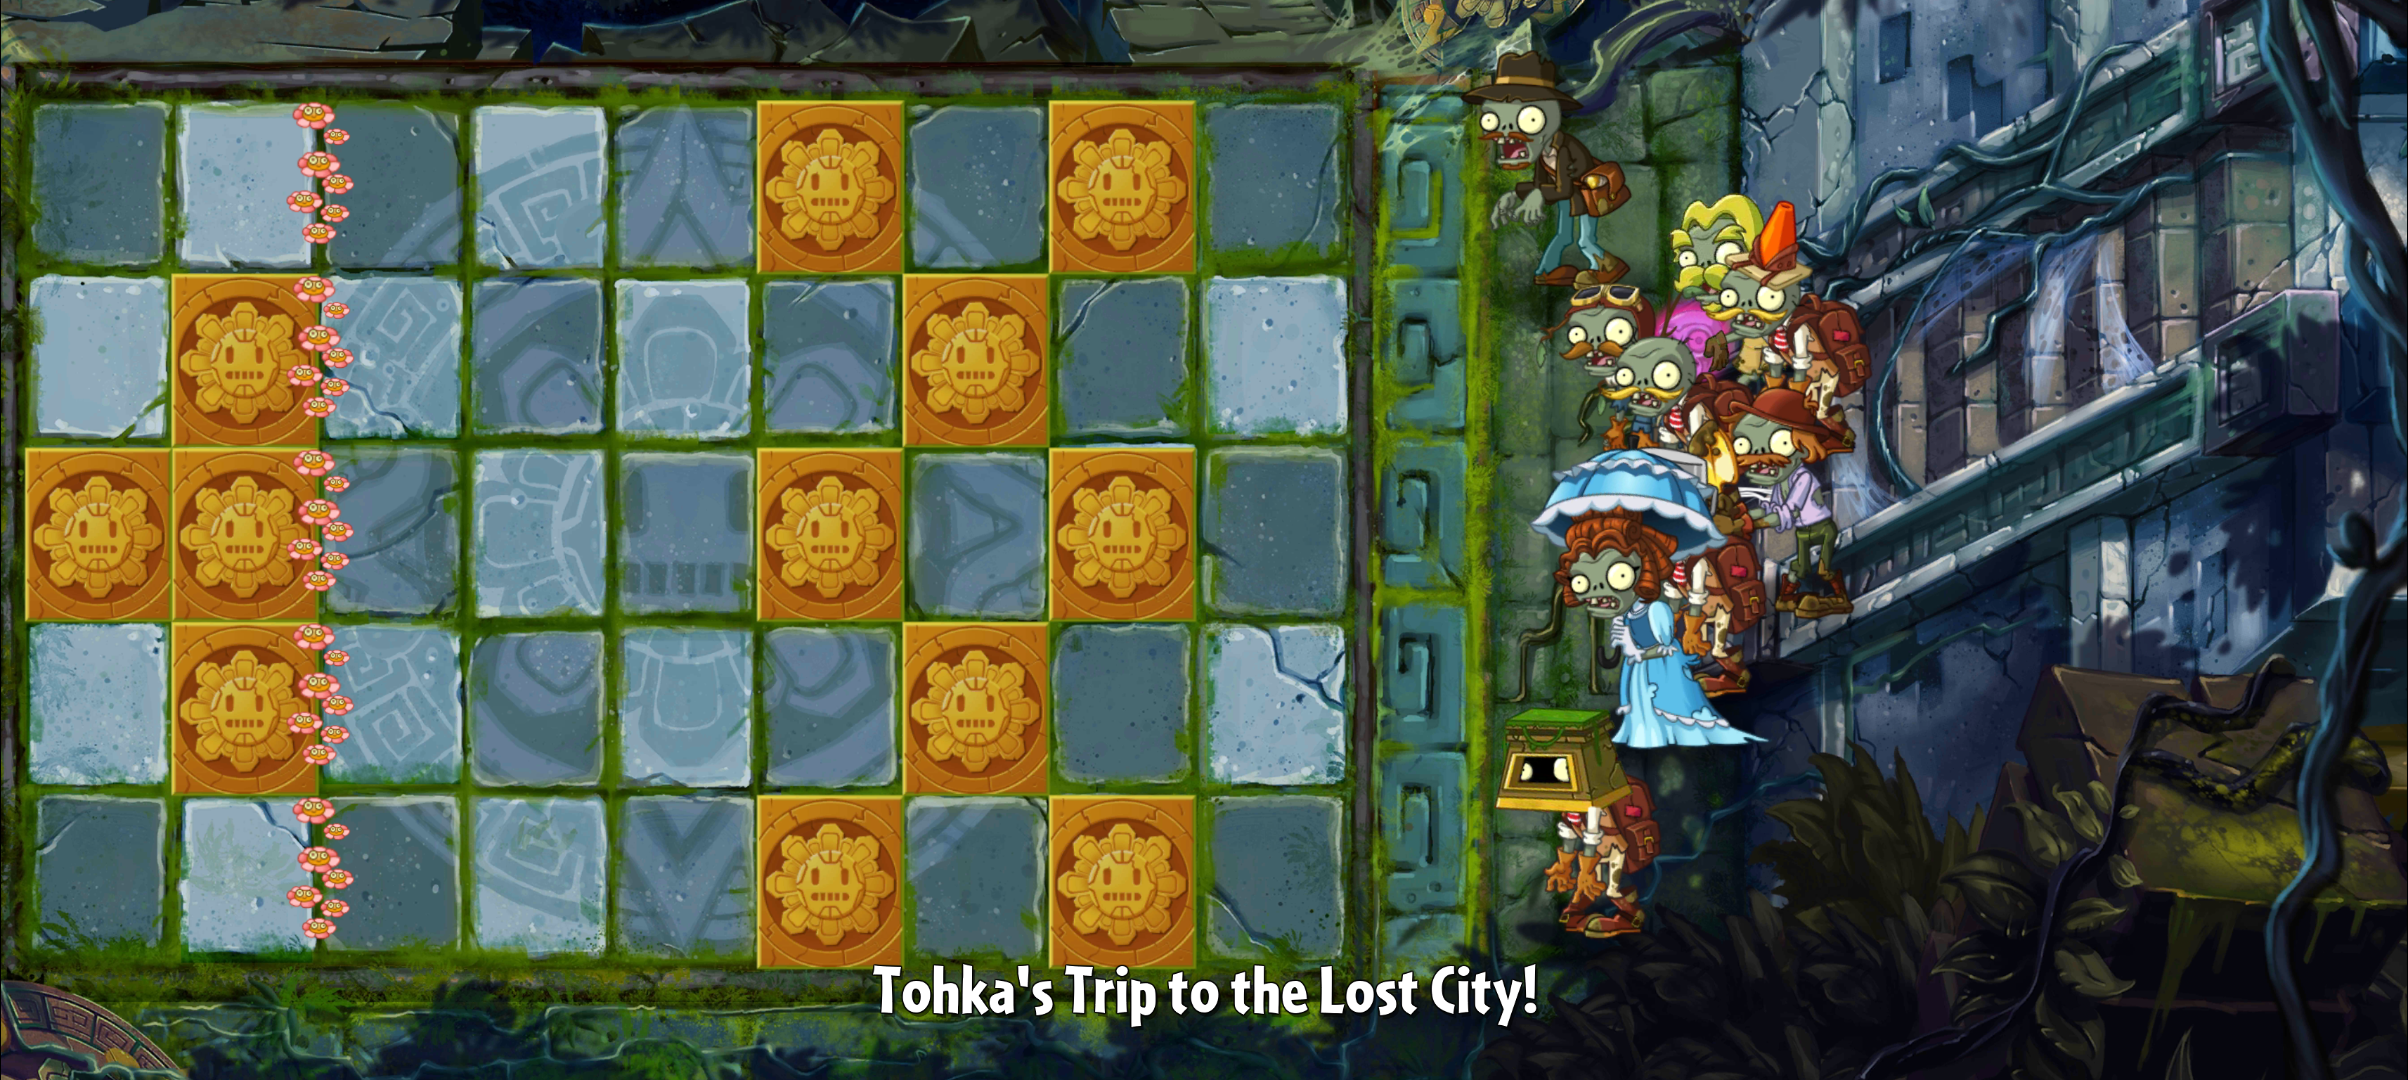 Lost City - Day 12, Plants vs. Zombies Wiki